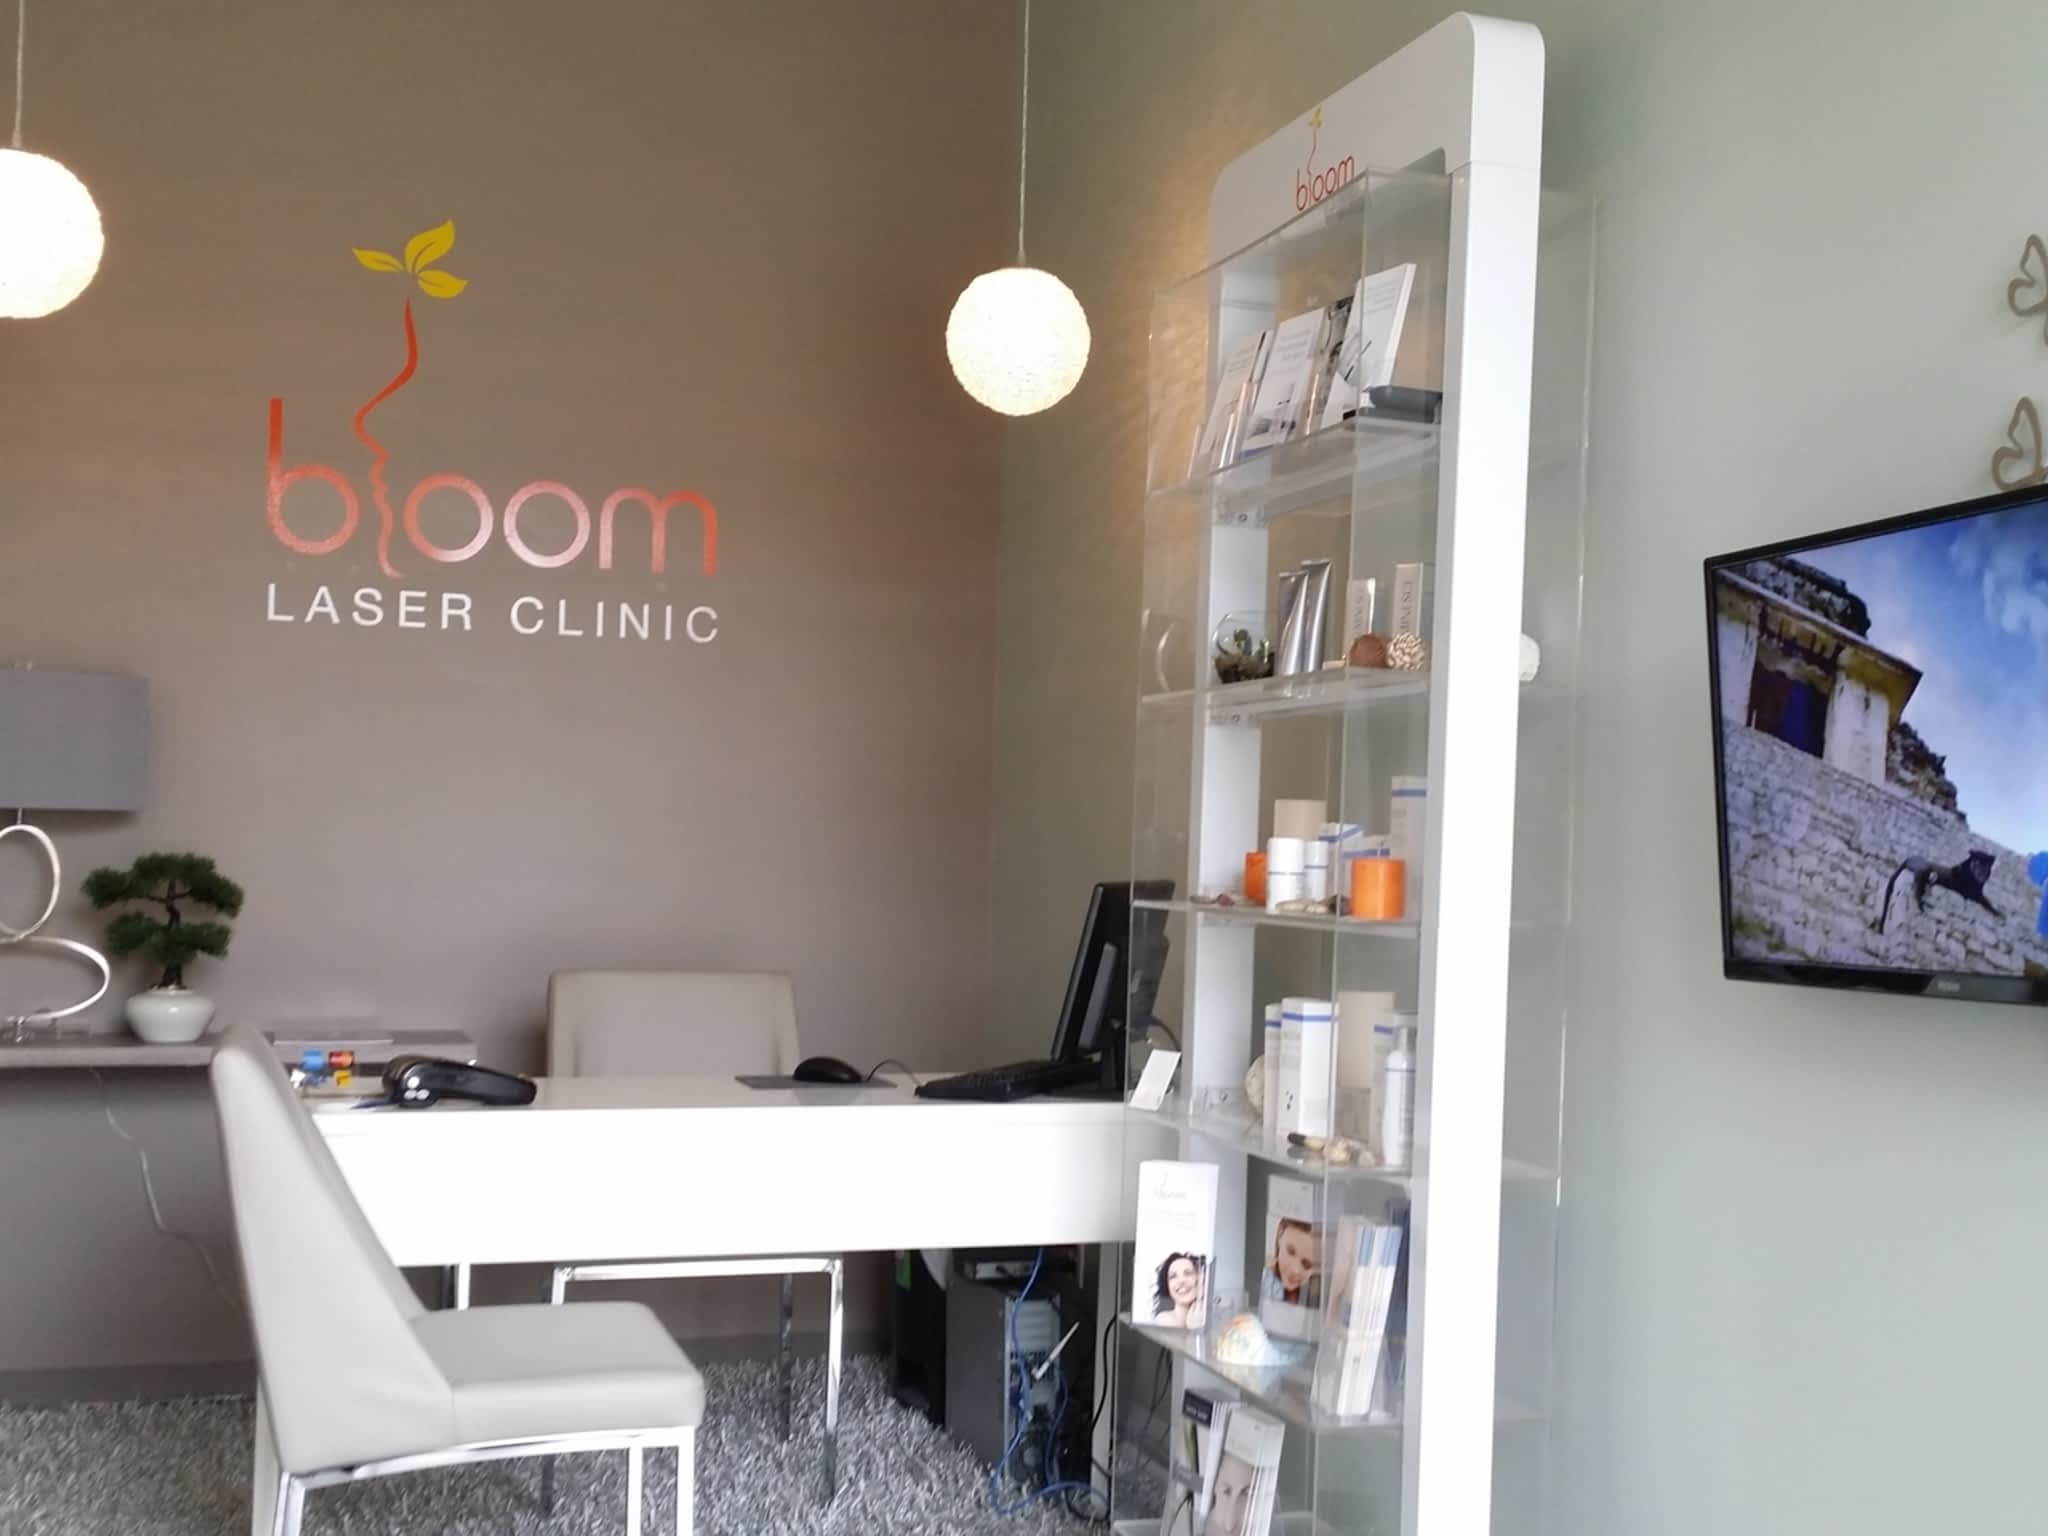 photo Bloom Laser Clinic